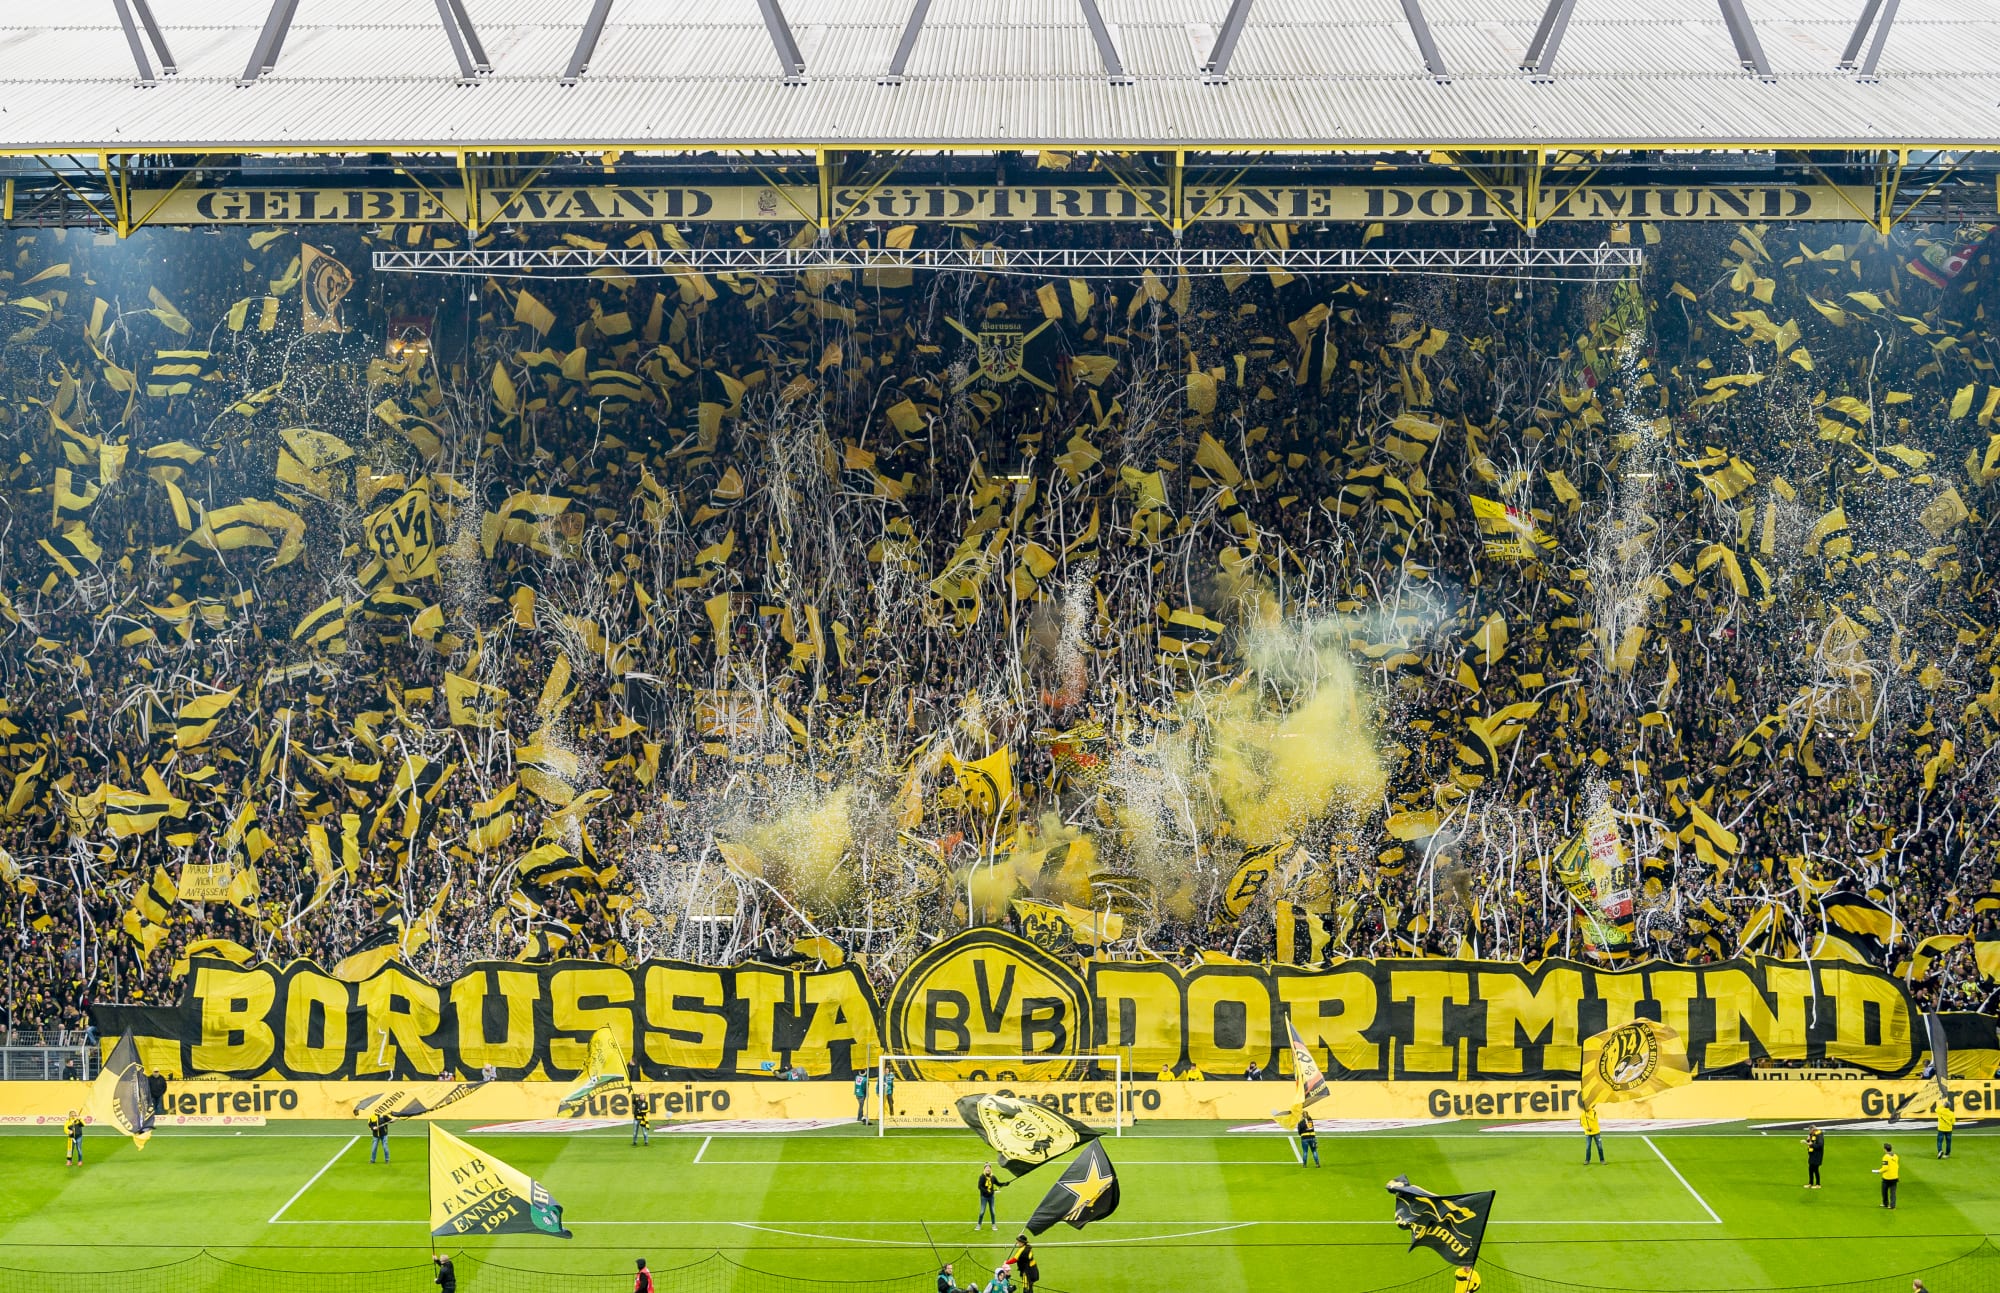 Drik fedt nok Spanien A Look Back: Why 2017 was a special year for Borussia Dortmund fans